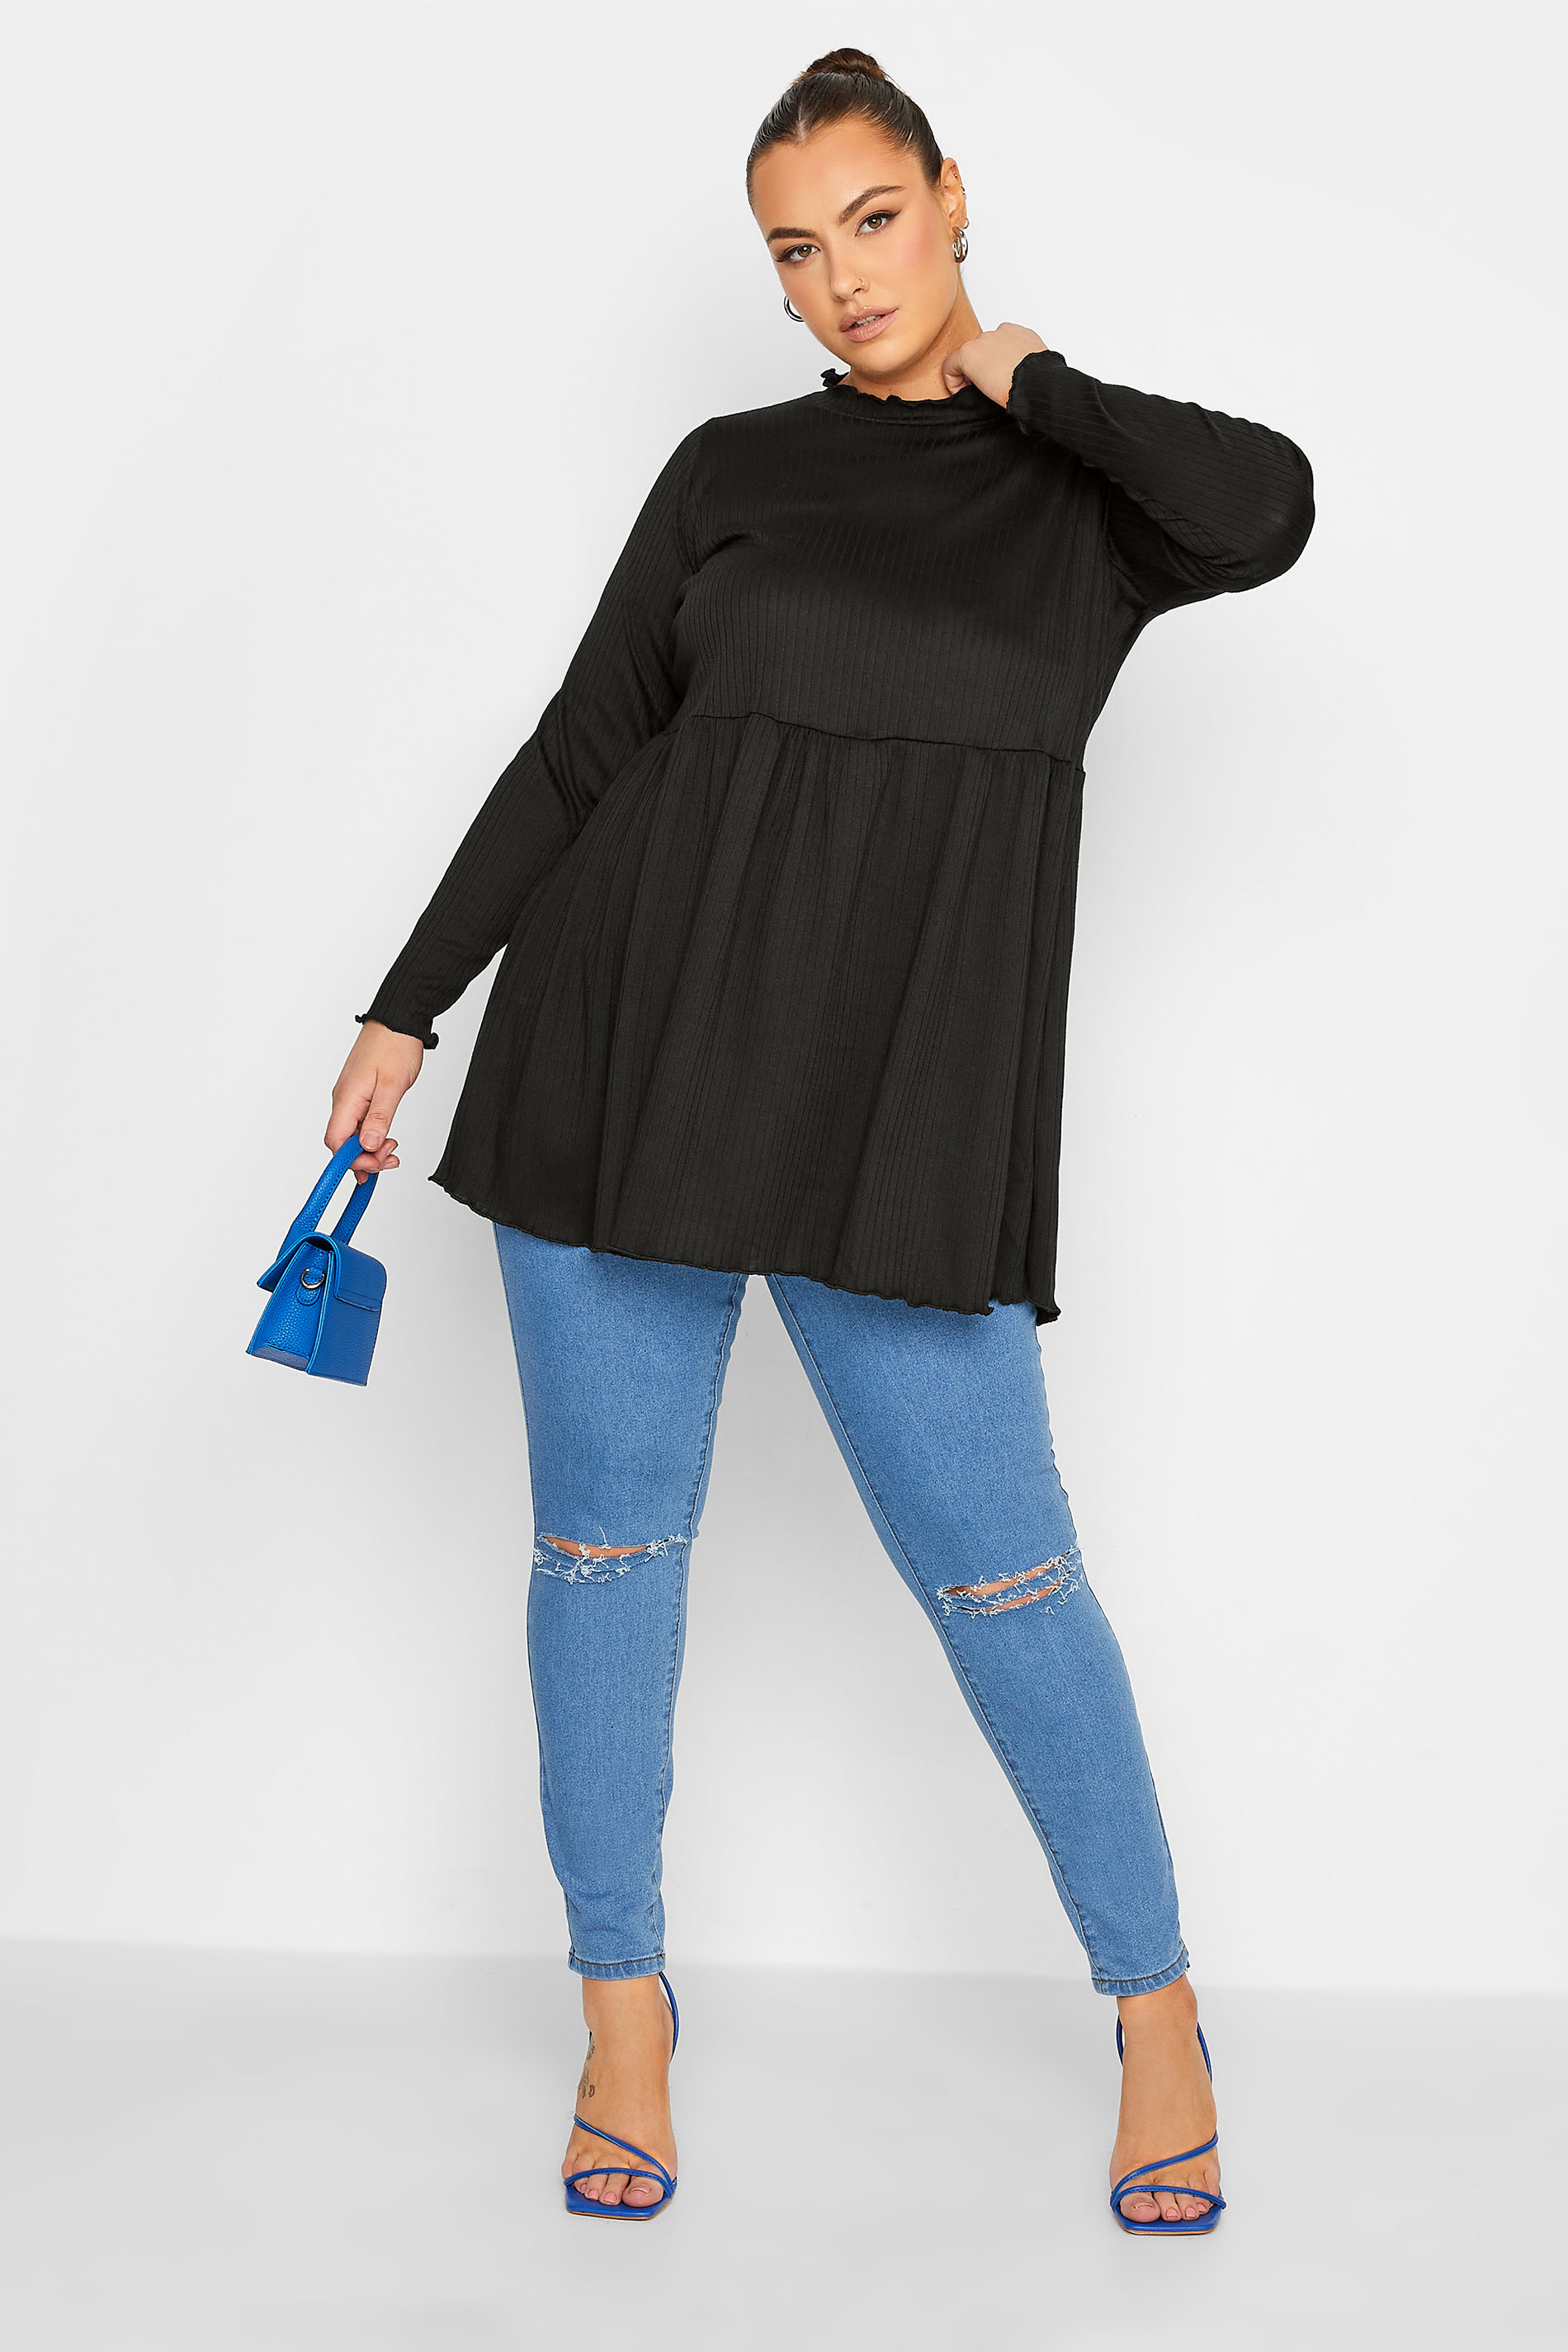 LIMITED COLLECTION Plus Size Black Peplum Lettuce Hem Top | Yours Clothing  2